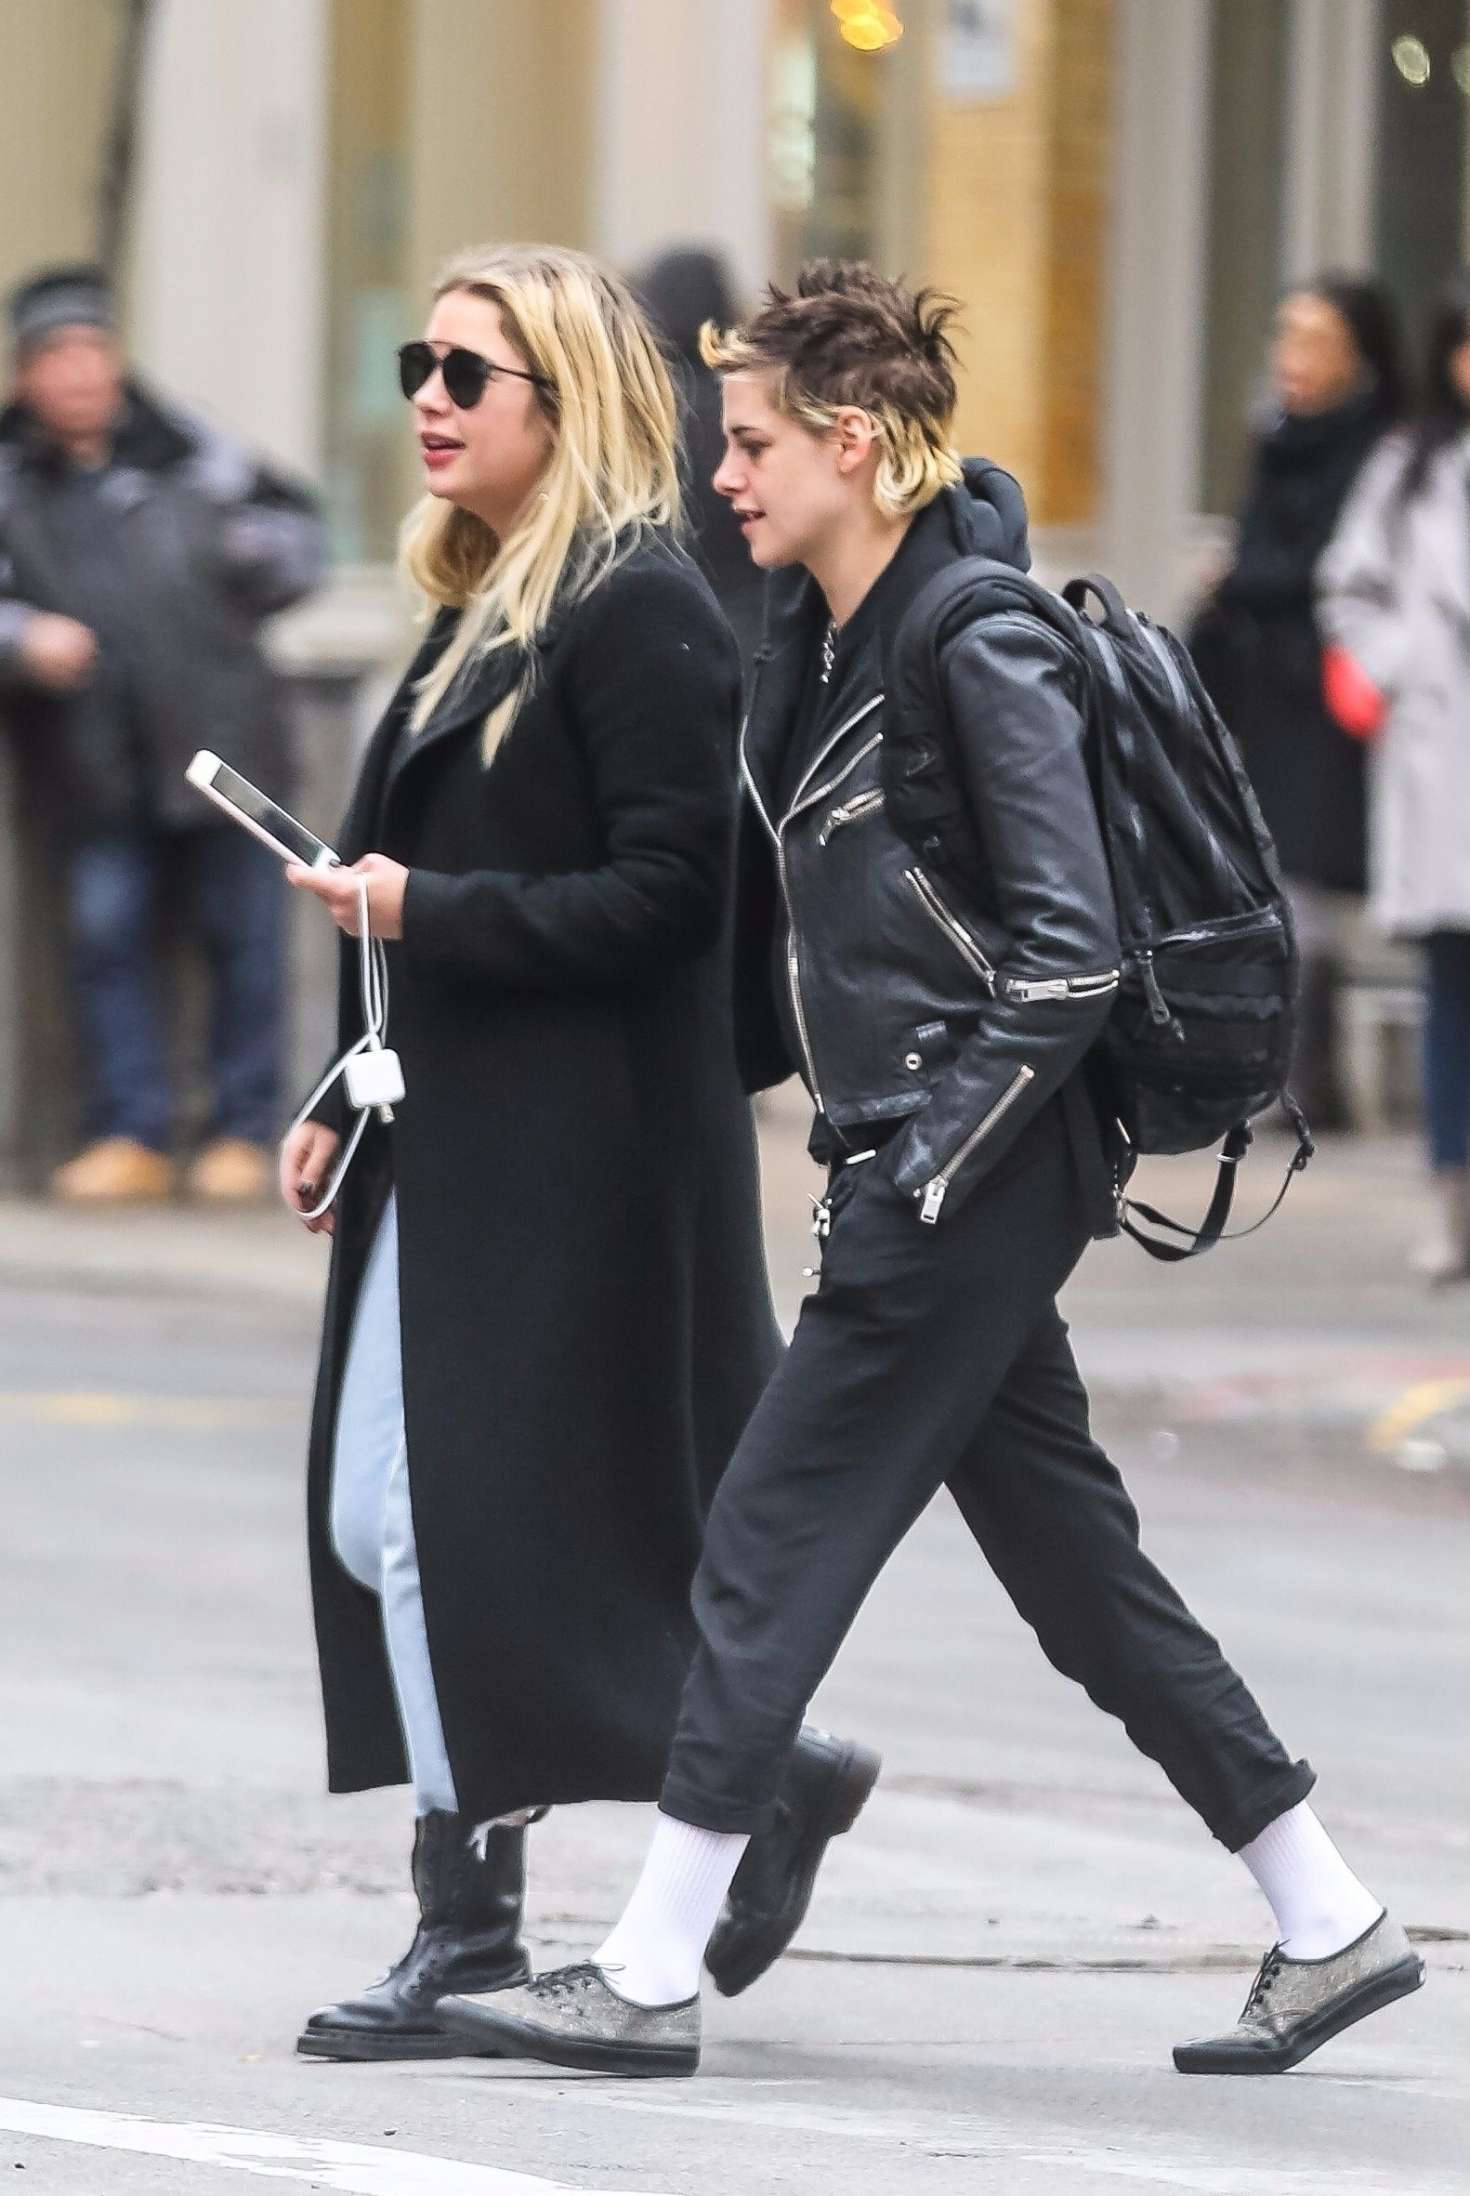 Ashley Benson and Kristen Stewart out together in NYC -38 | GotCeleb